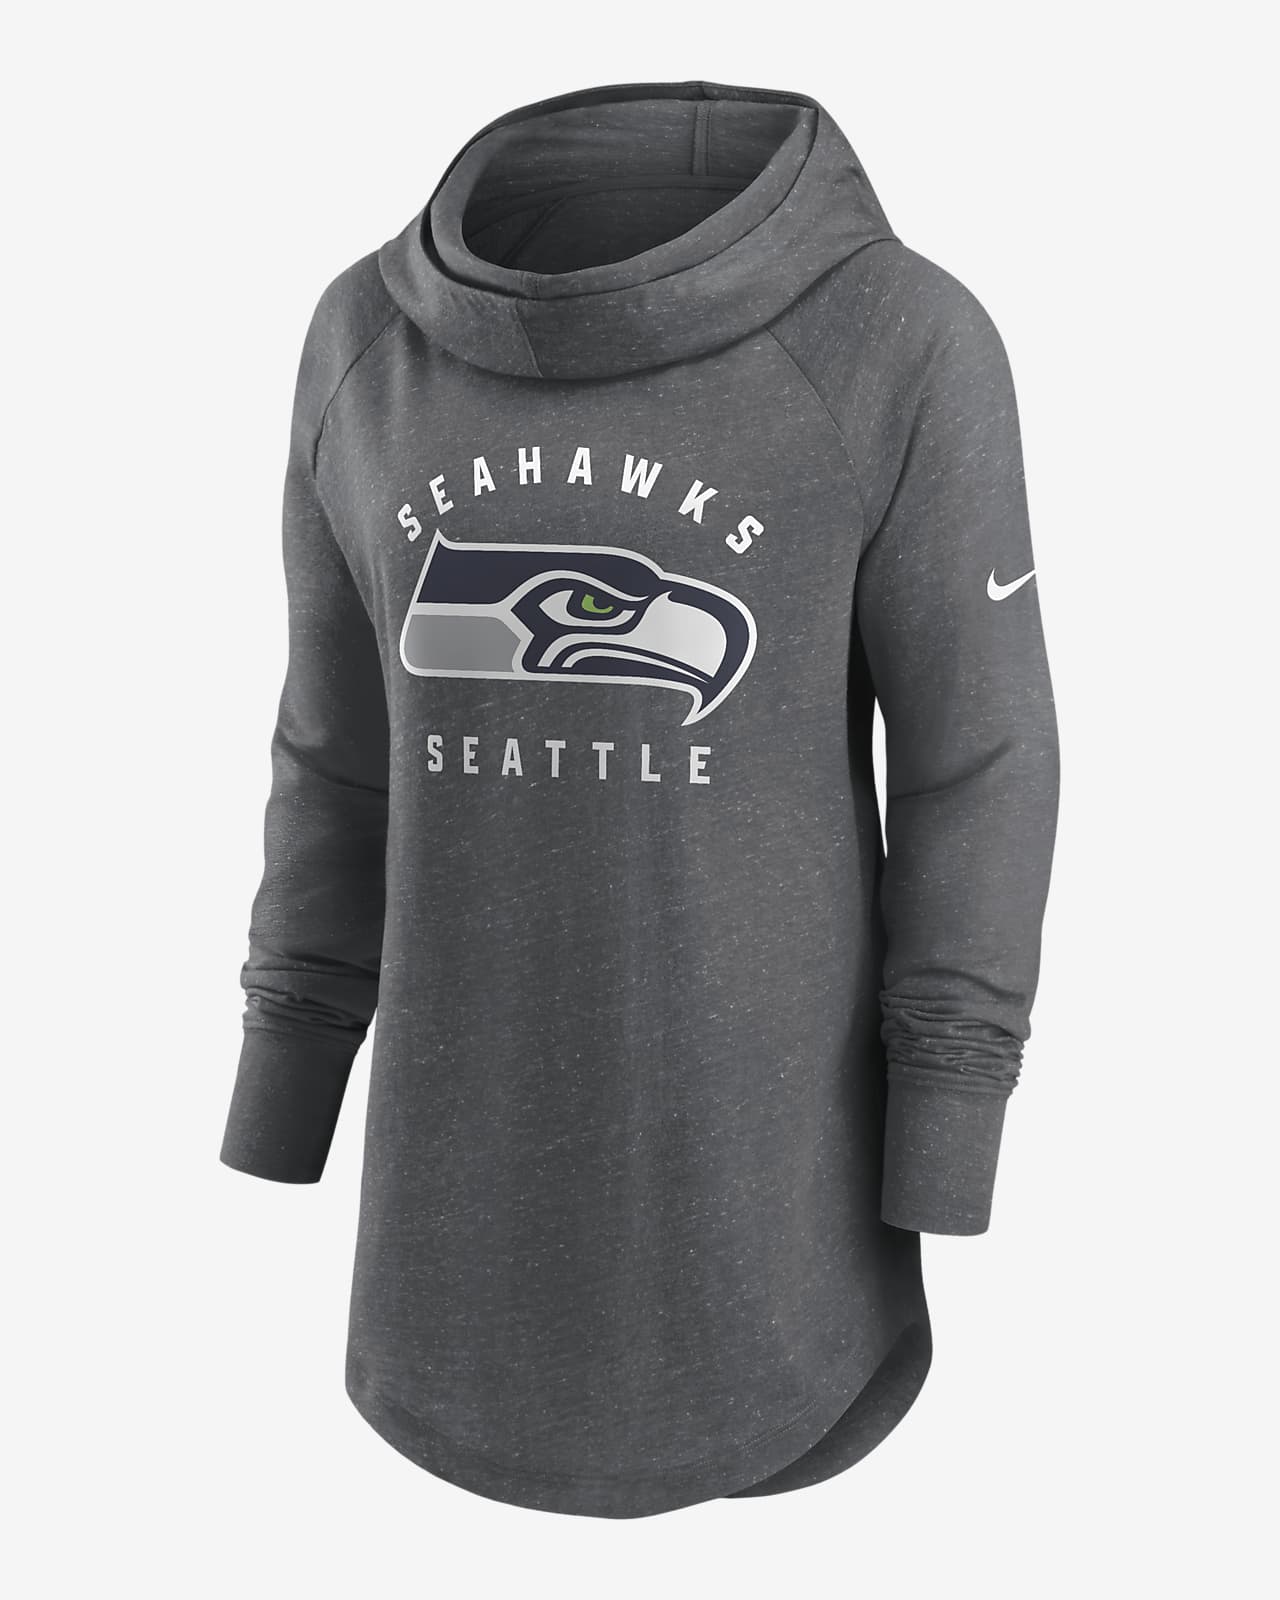 Women's Nike Heather Charcoal Seattle Seahawks Raglan Funnel Neck Pullover Hoodie Size: Extra Small